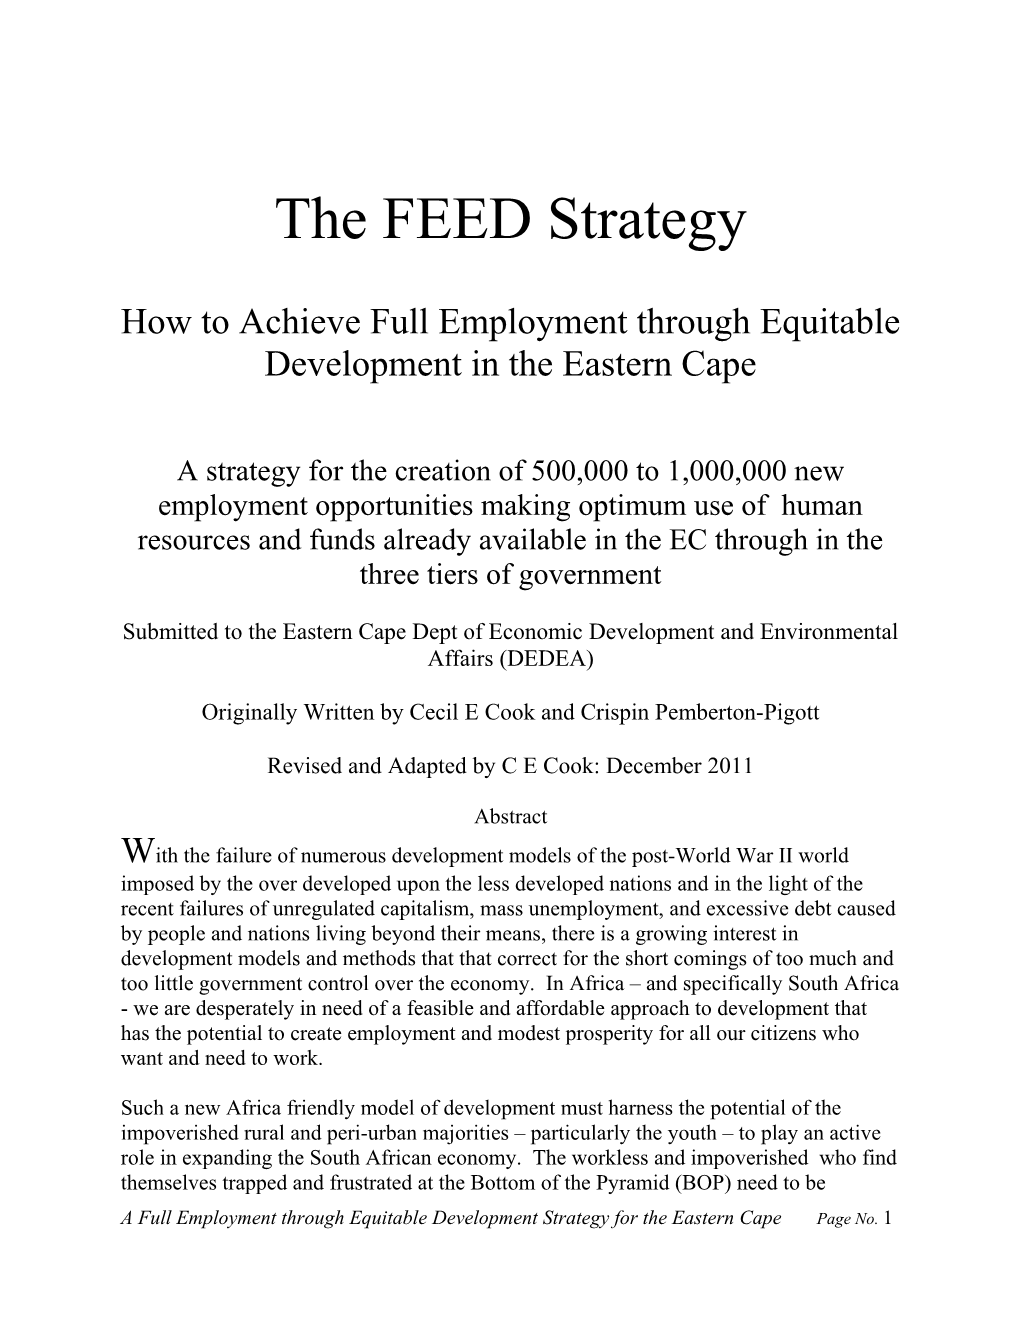 How to Achieve Full Employment Through Equitable Development in the Eastern Cape